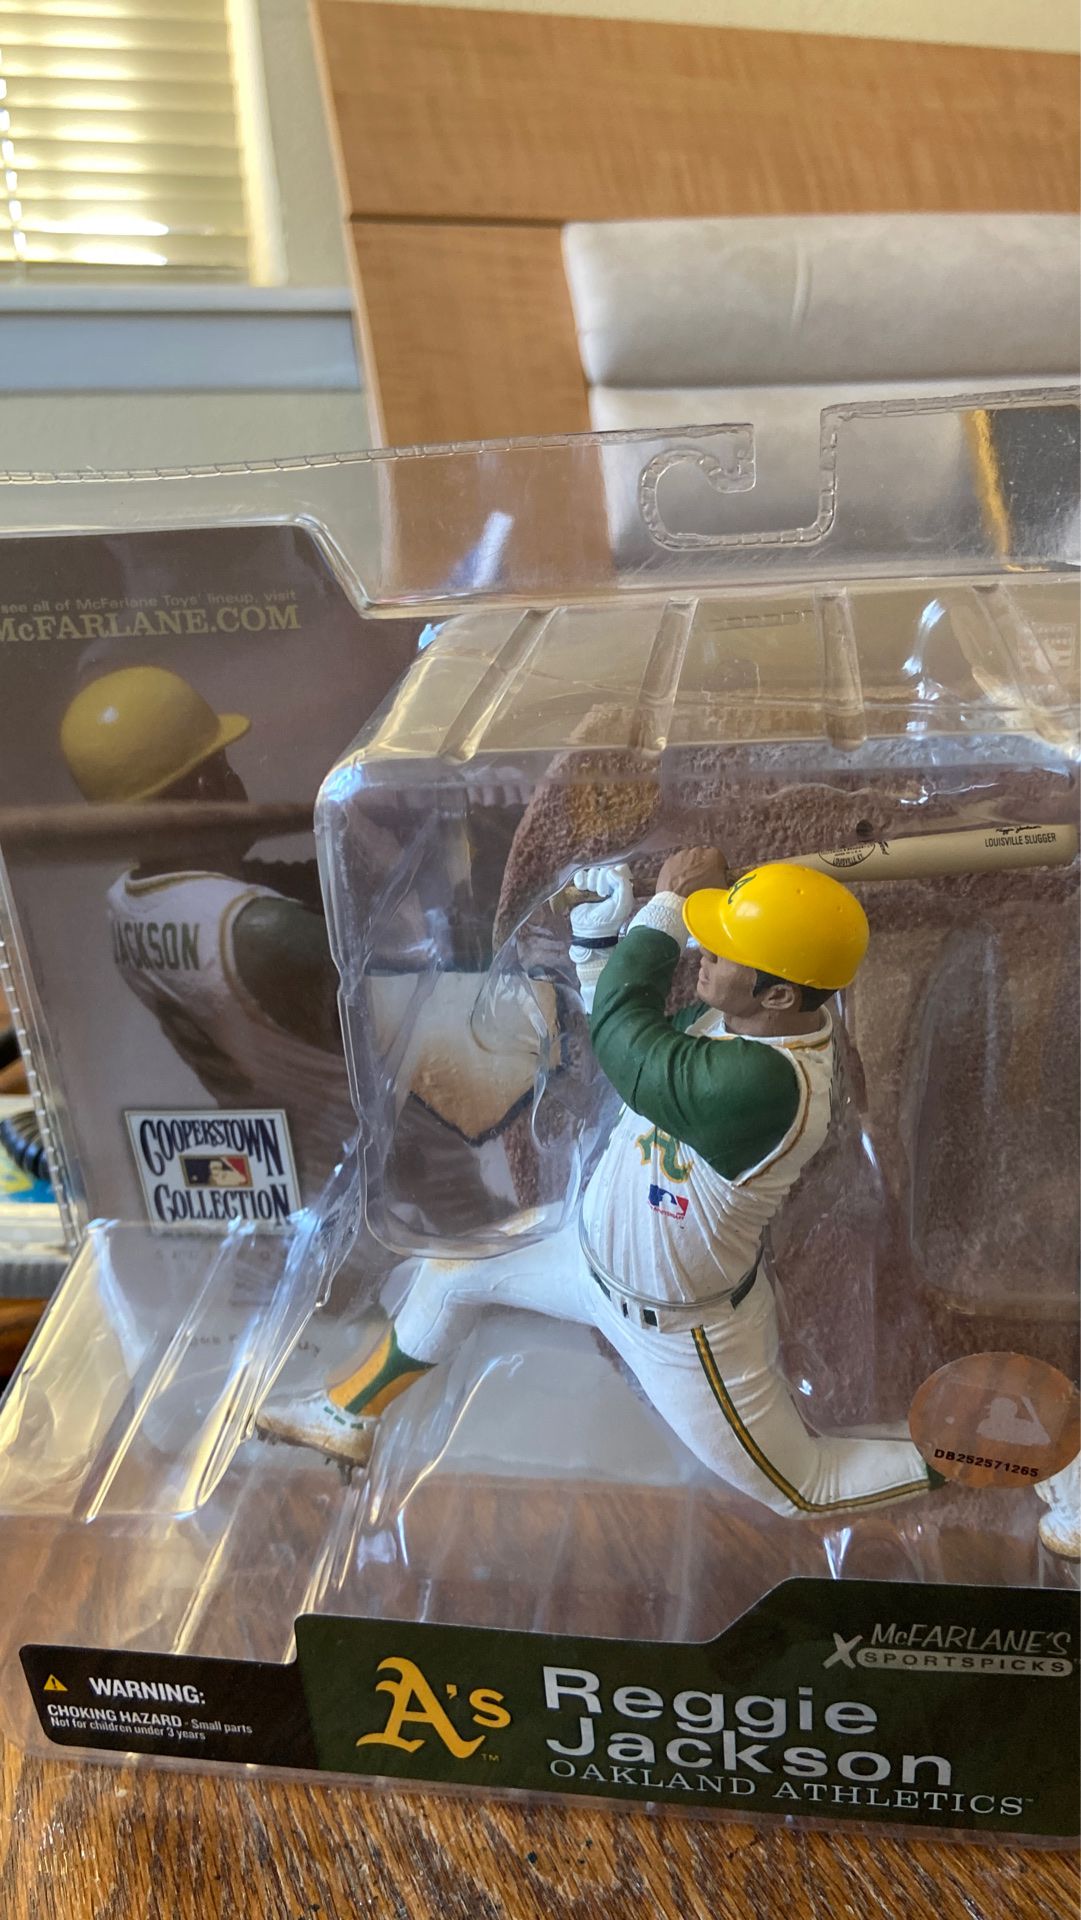 Oakland A’s McFarlane 2004 Cooperstown Collection Reggie Jackson CHASE Action Figure- Nice Condition!